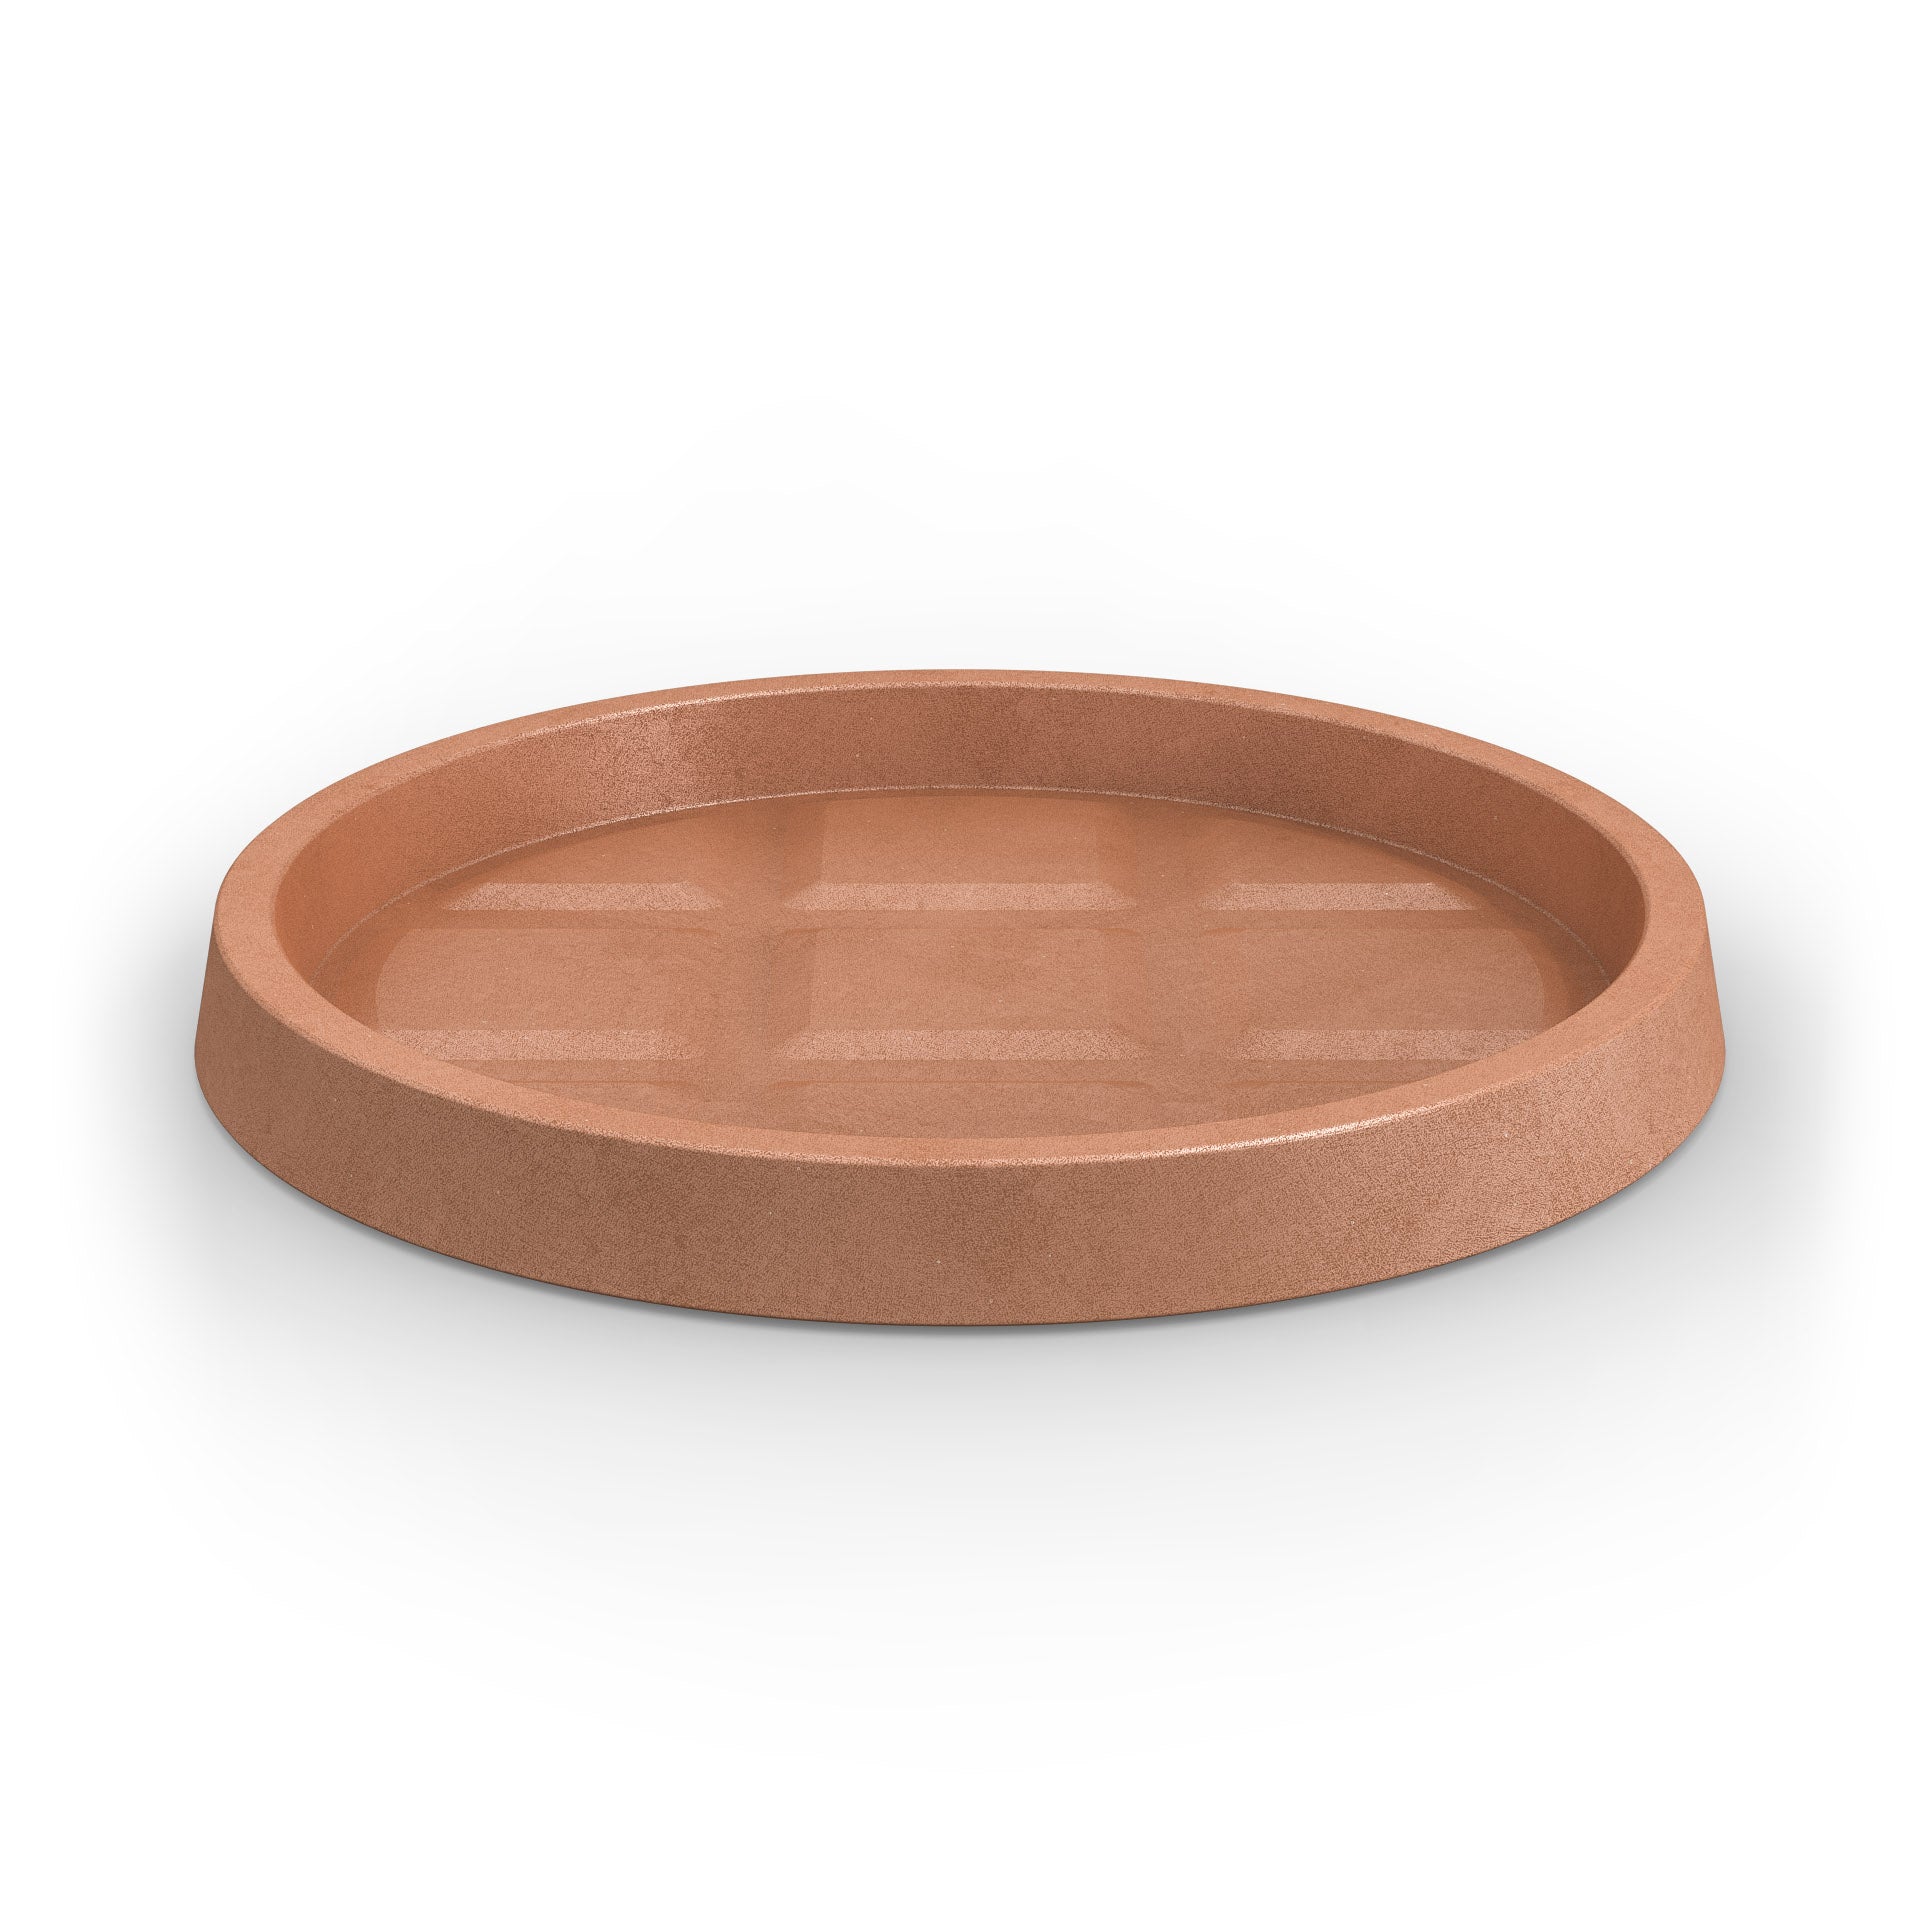 A rustic terracotta saucer for Modscene planters. NZ made.